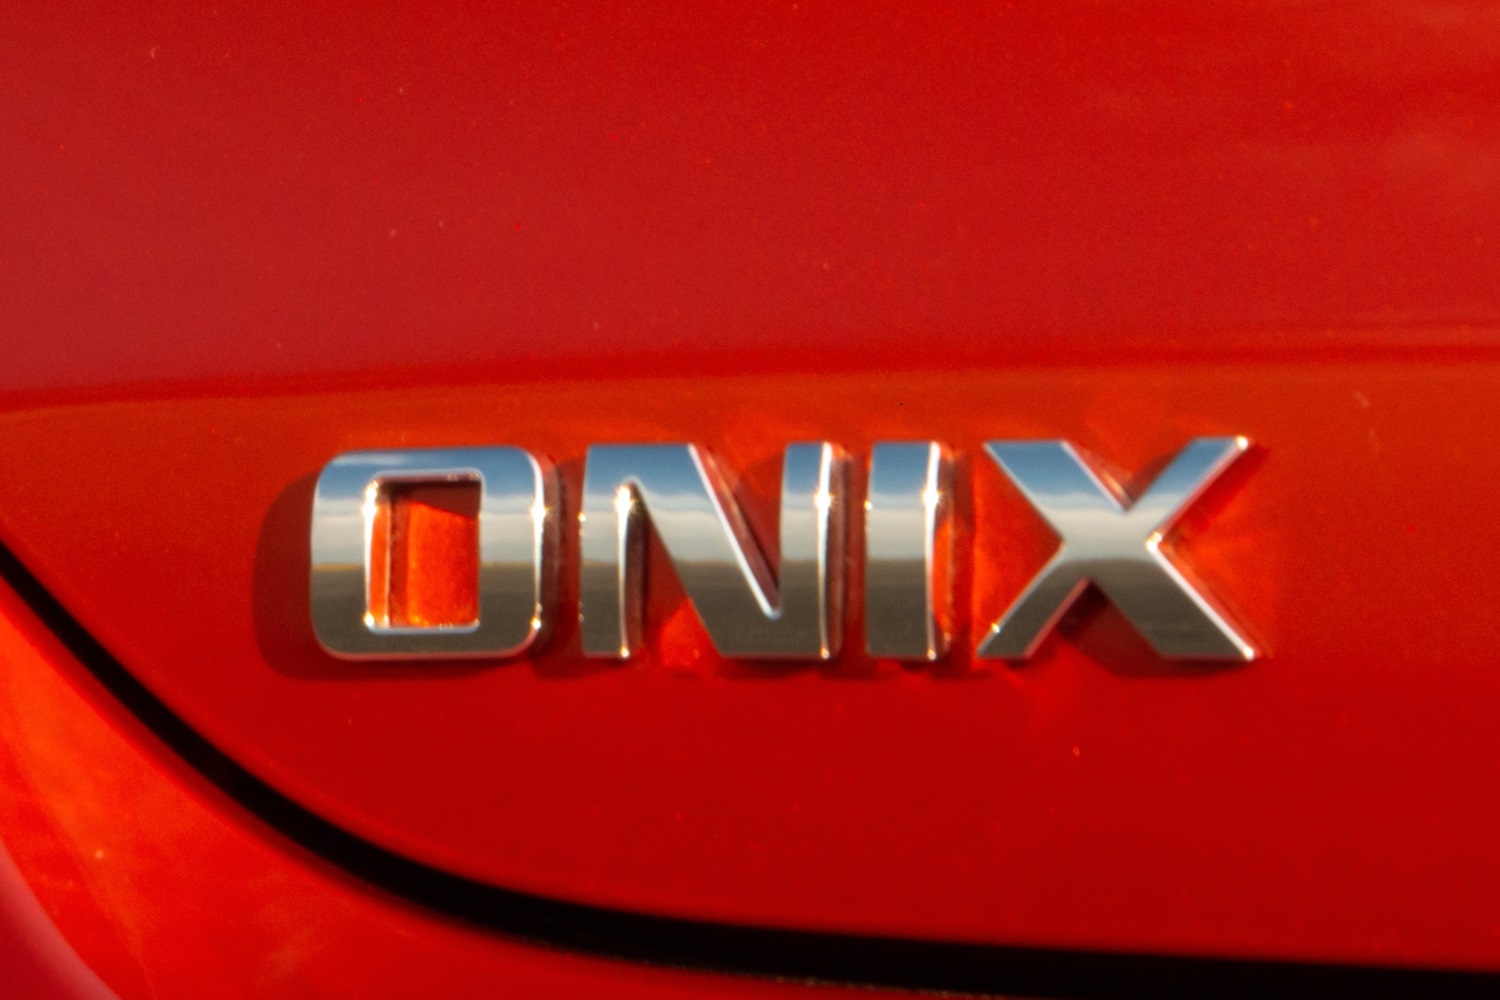 Brazil January 2020: Chevrolet Onix Plus smashes Prisma record in third  market drop in past 6 months (-3.1%) – Best Selling Cars Blog